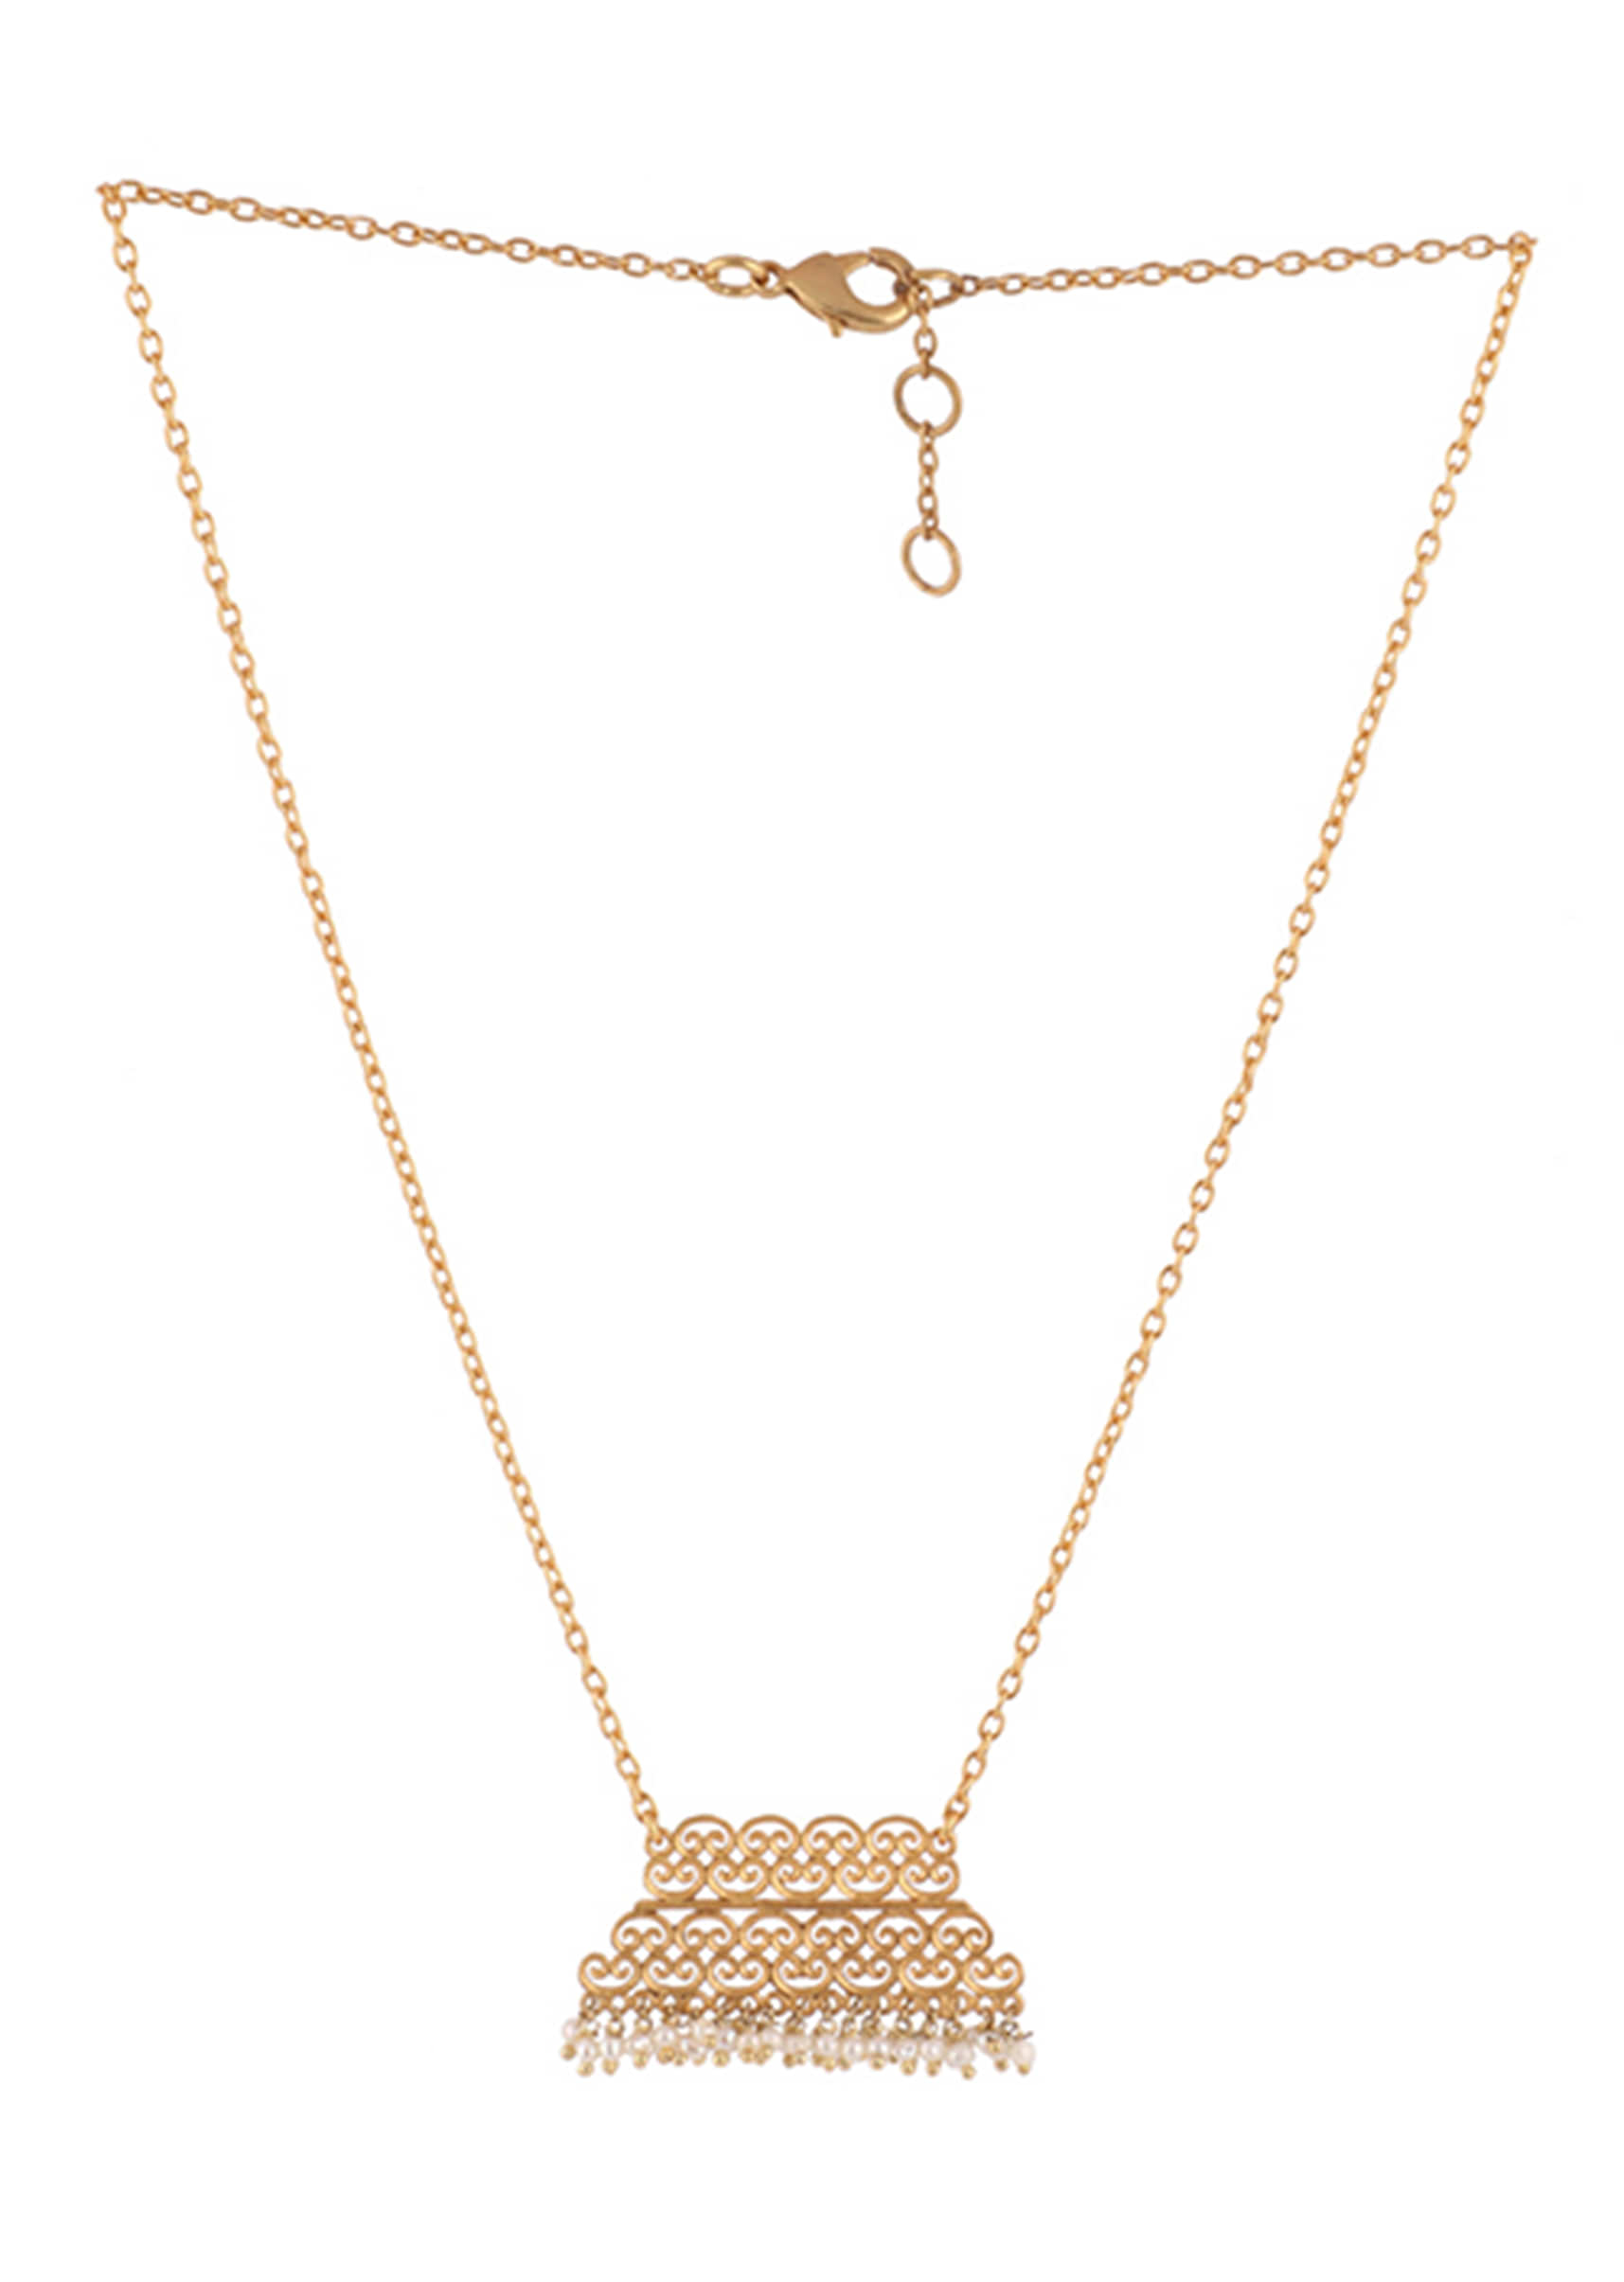 Gold Plated Necklace With Geometric Filigree Pendant Edged In Moti By Zariin